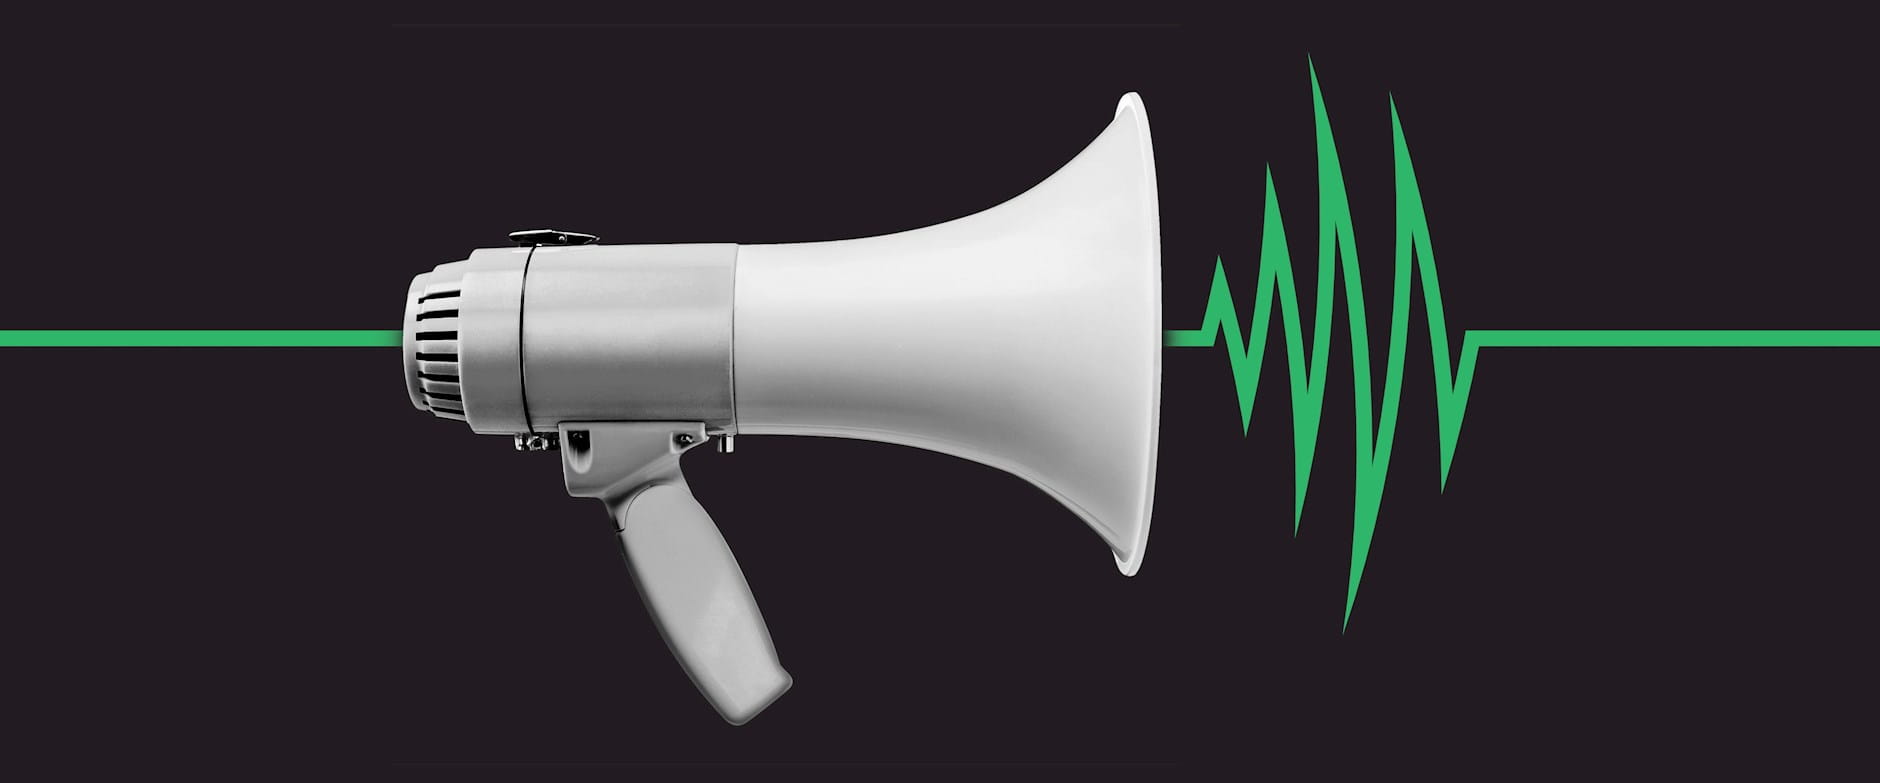 Green line showing amplification from a megaphone